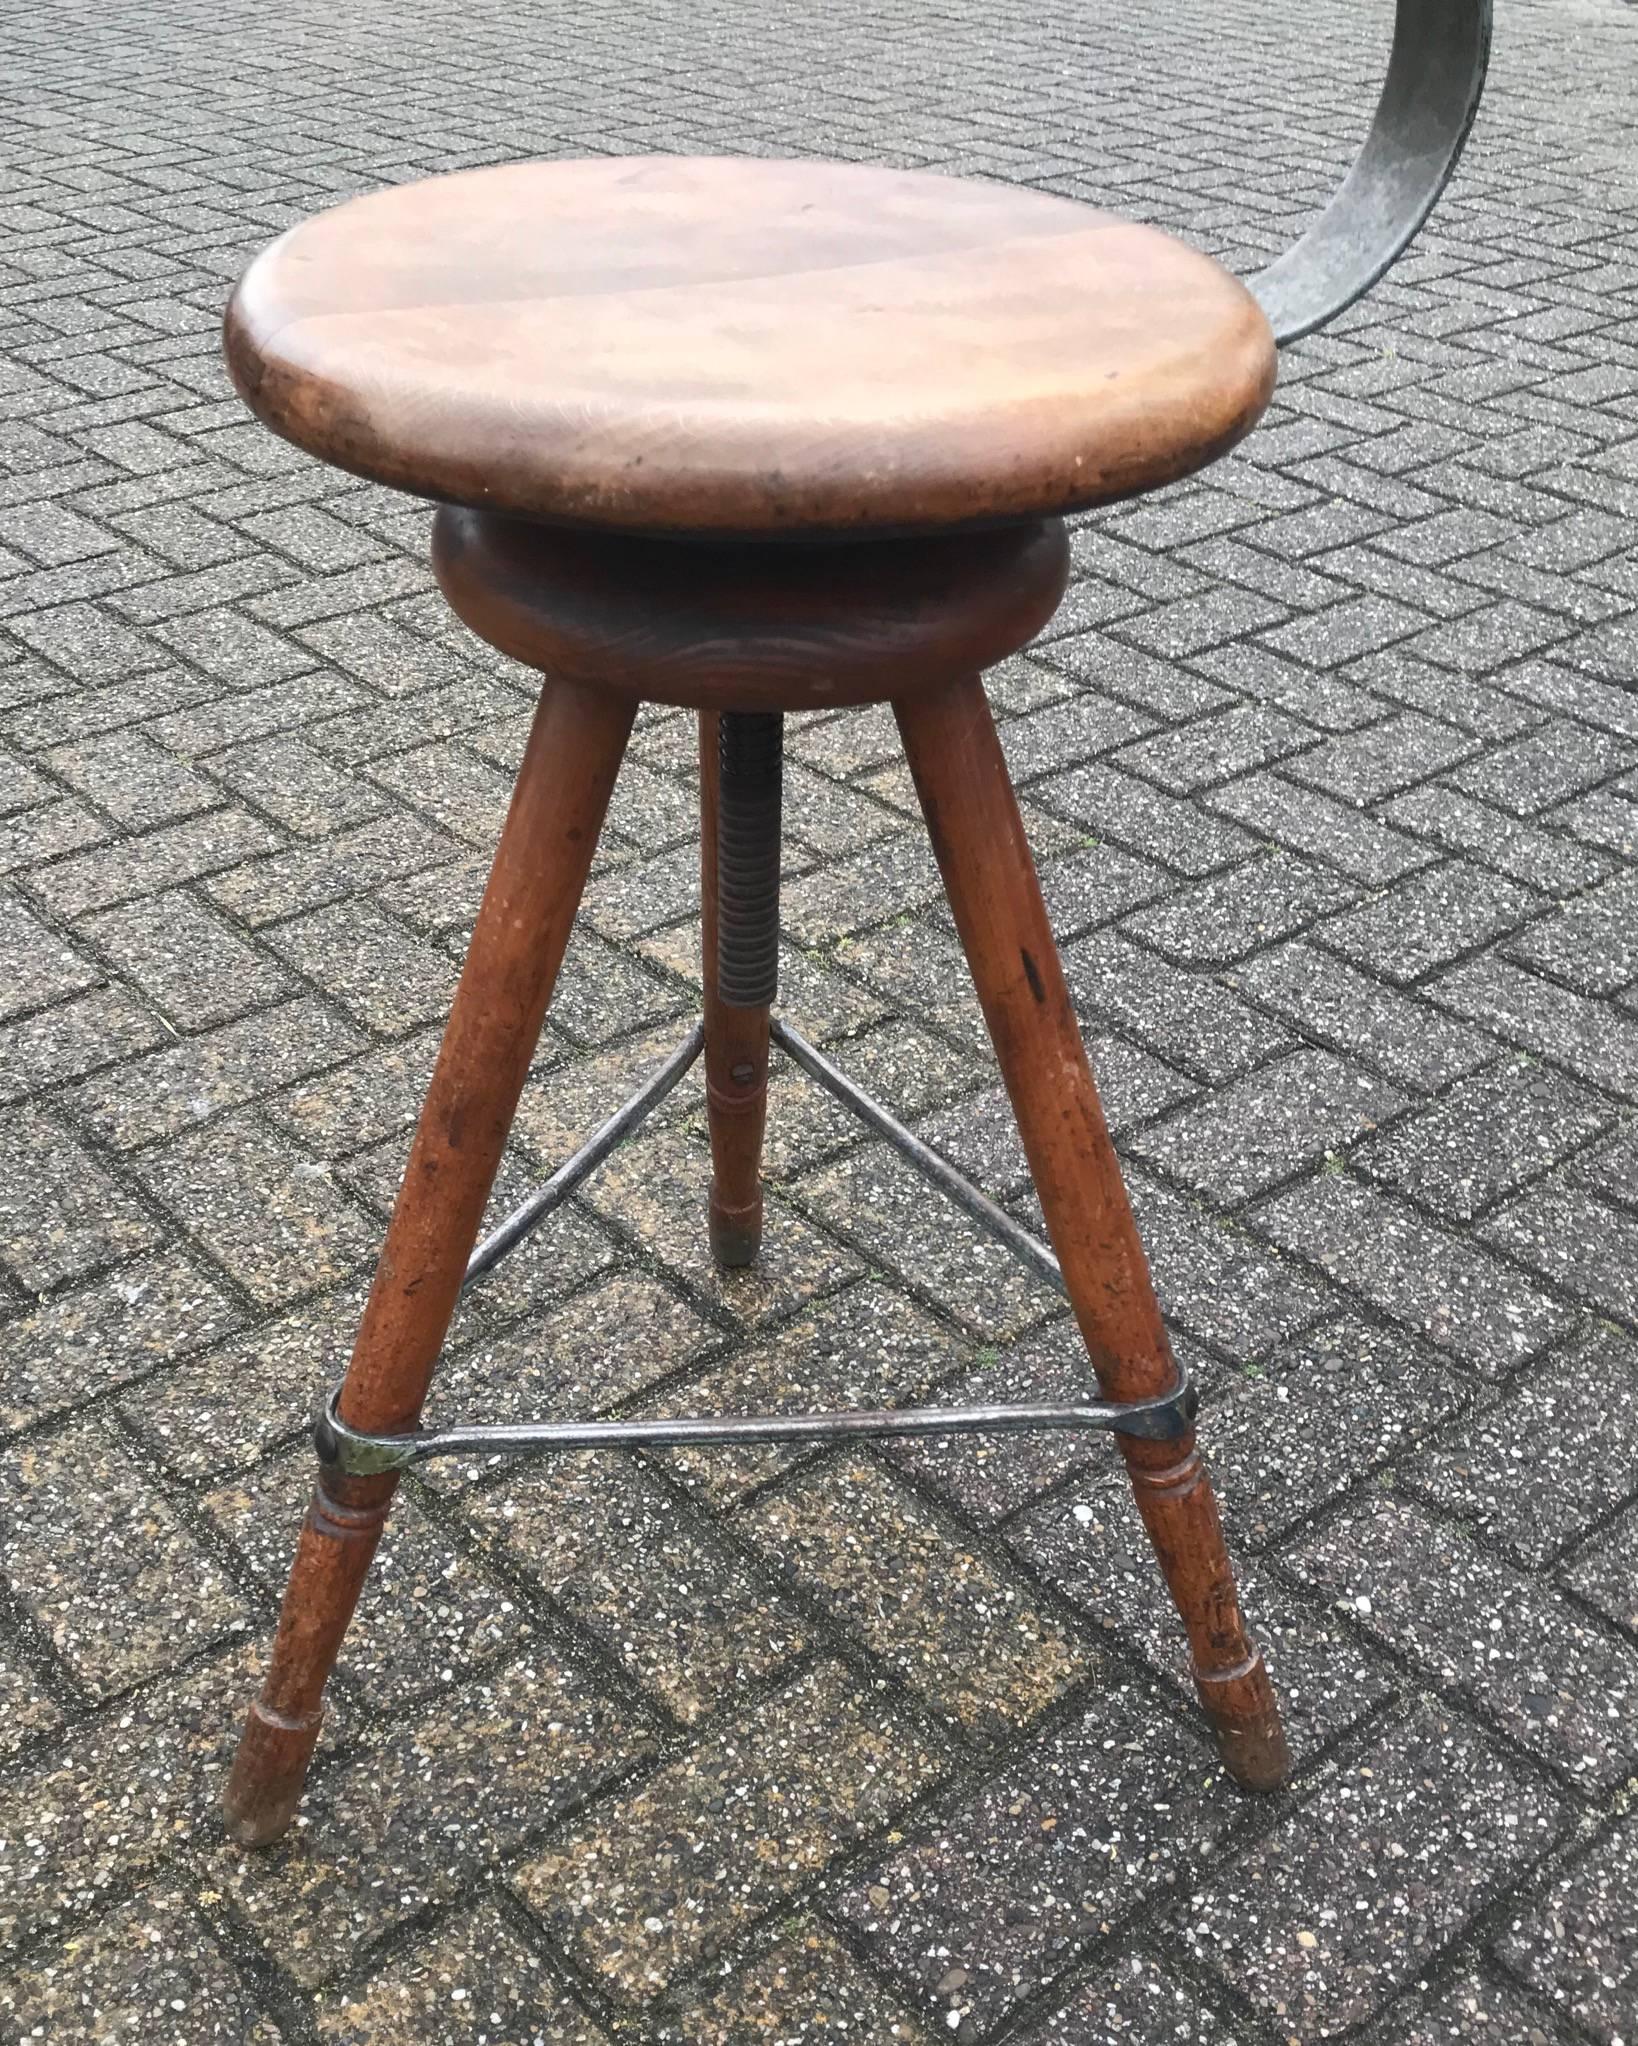 Great design, strong, sturdy and durable high stool.

Here is another one of our recent great finds that ticks al the boxes, because this early 1900's stool with backrest is rare, it has the look, it has the quality and the used condition is exactly